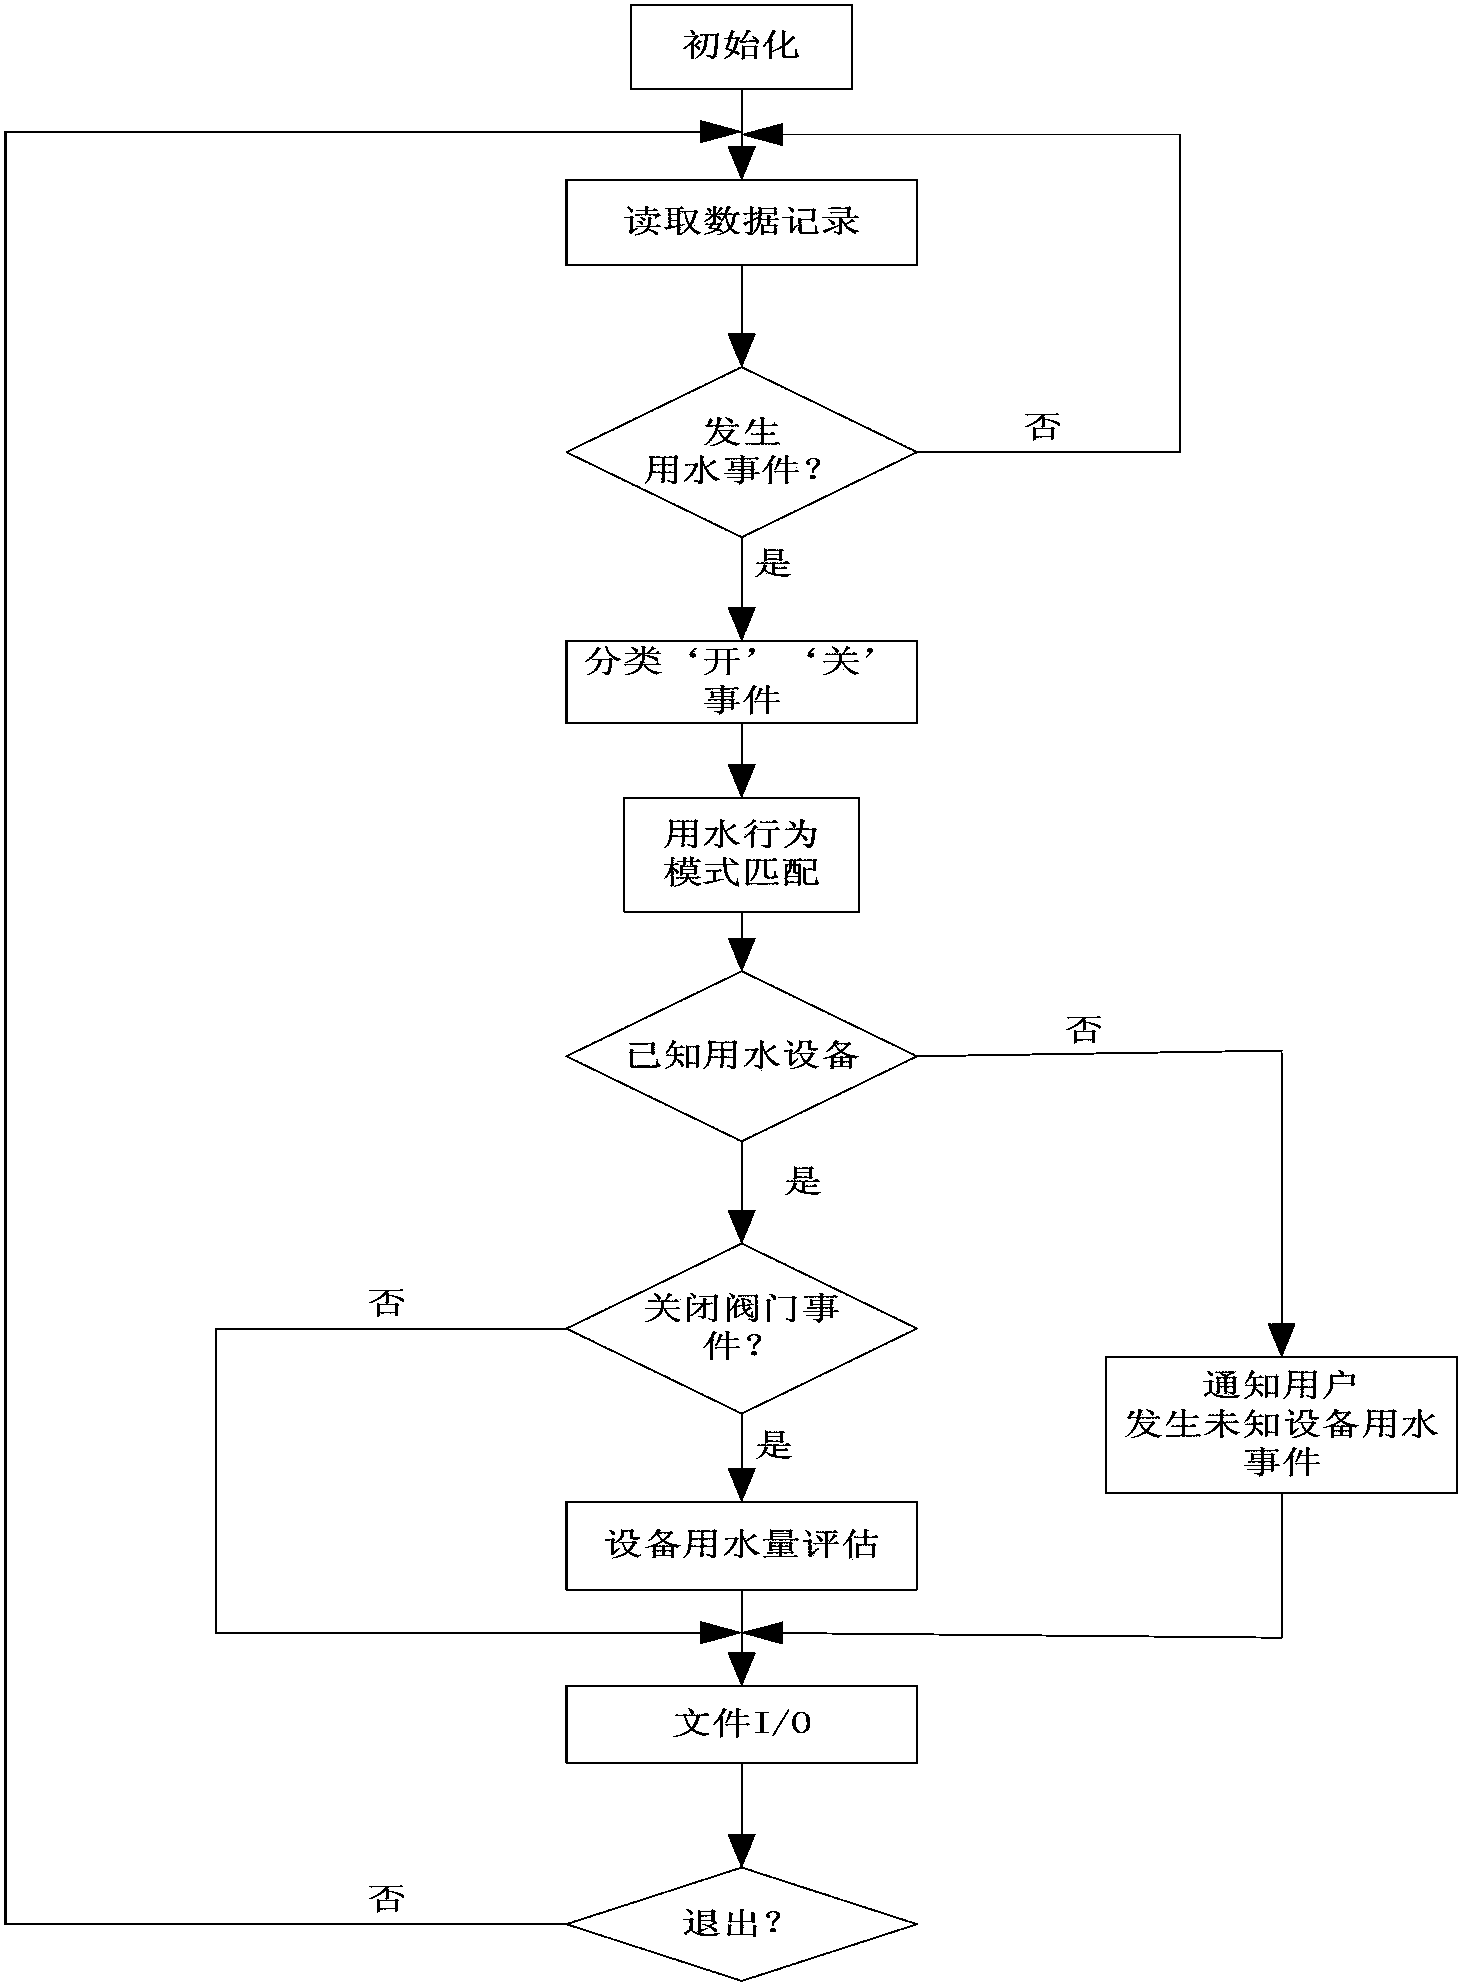 Single-point-sensing-based household water intelligent monitoring method and equipment thereof